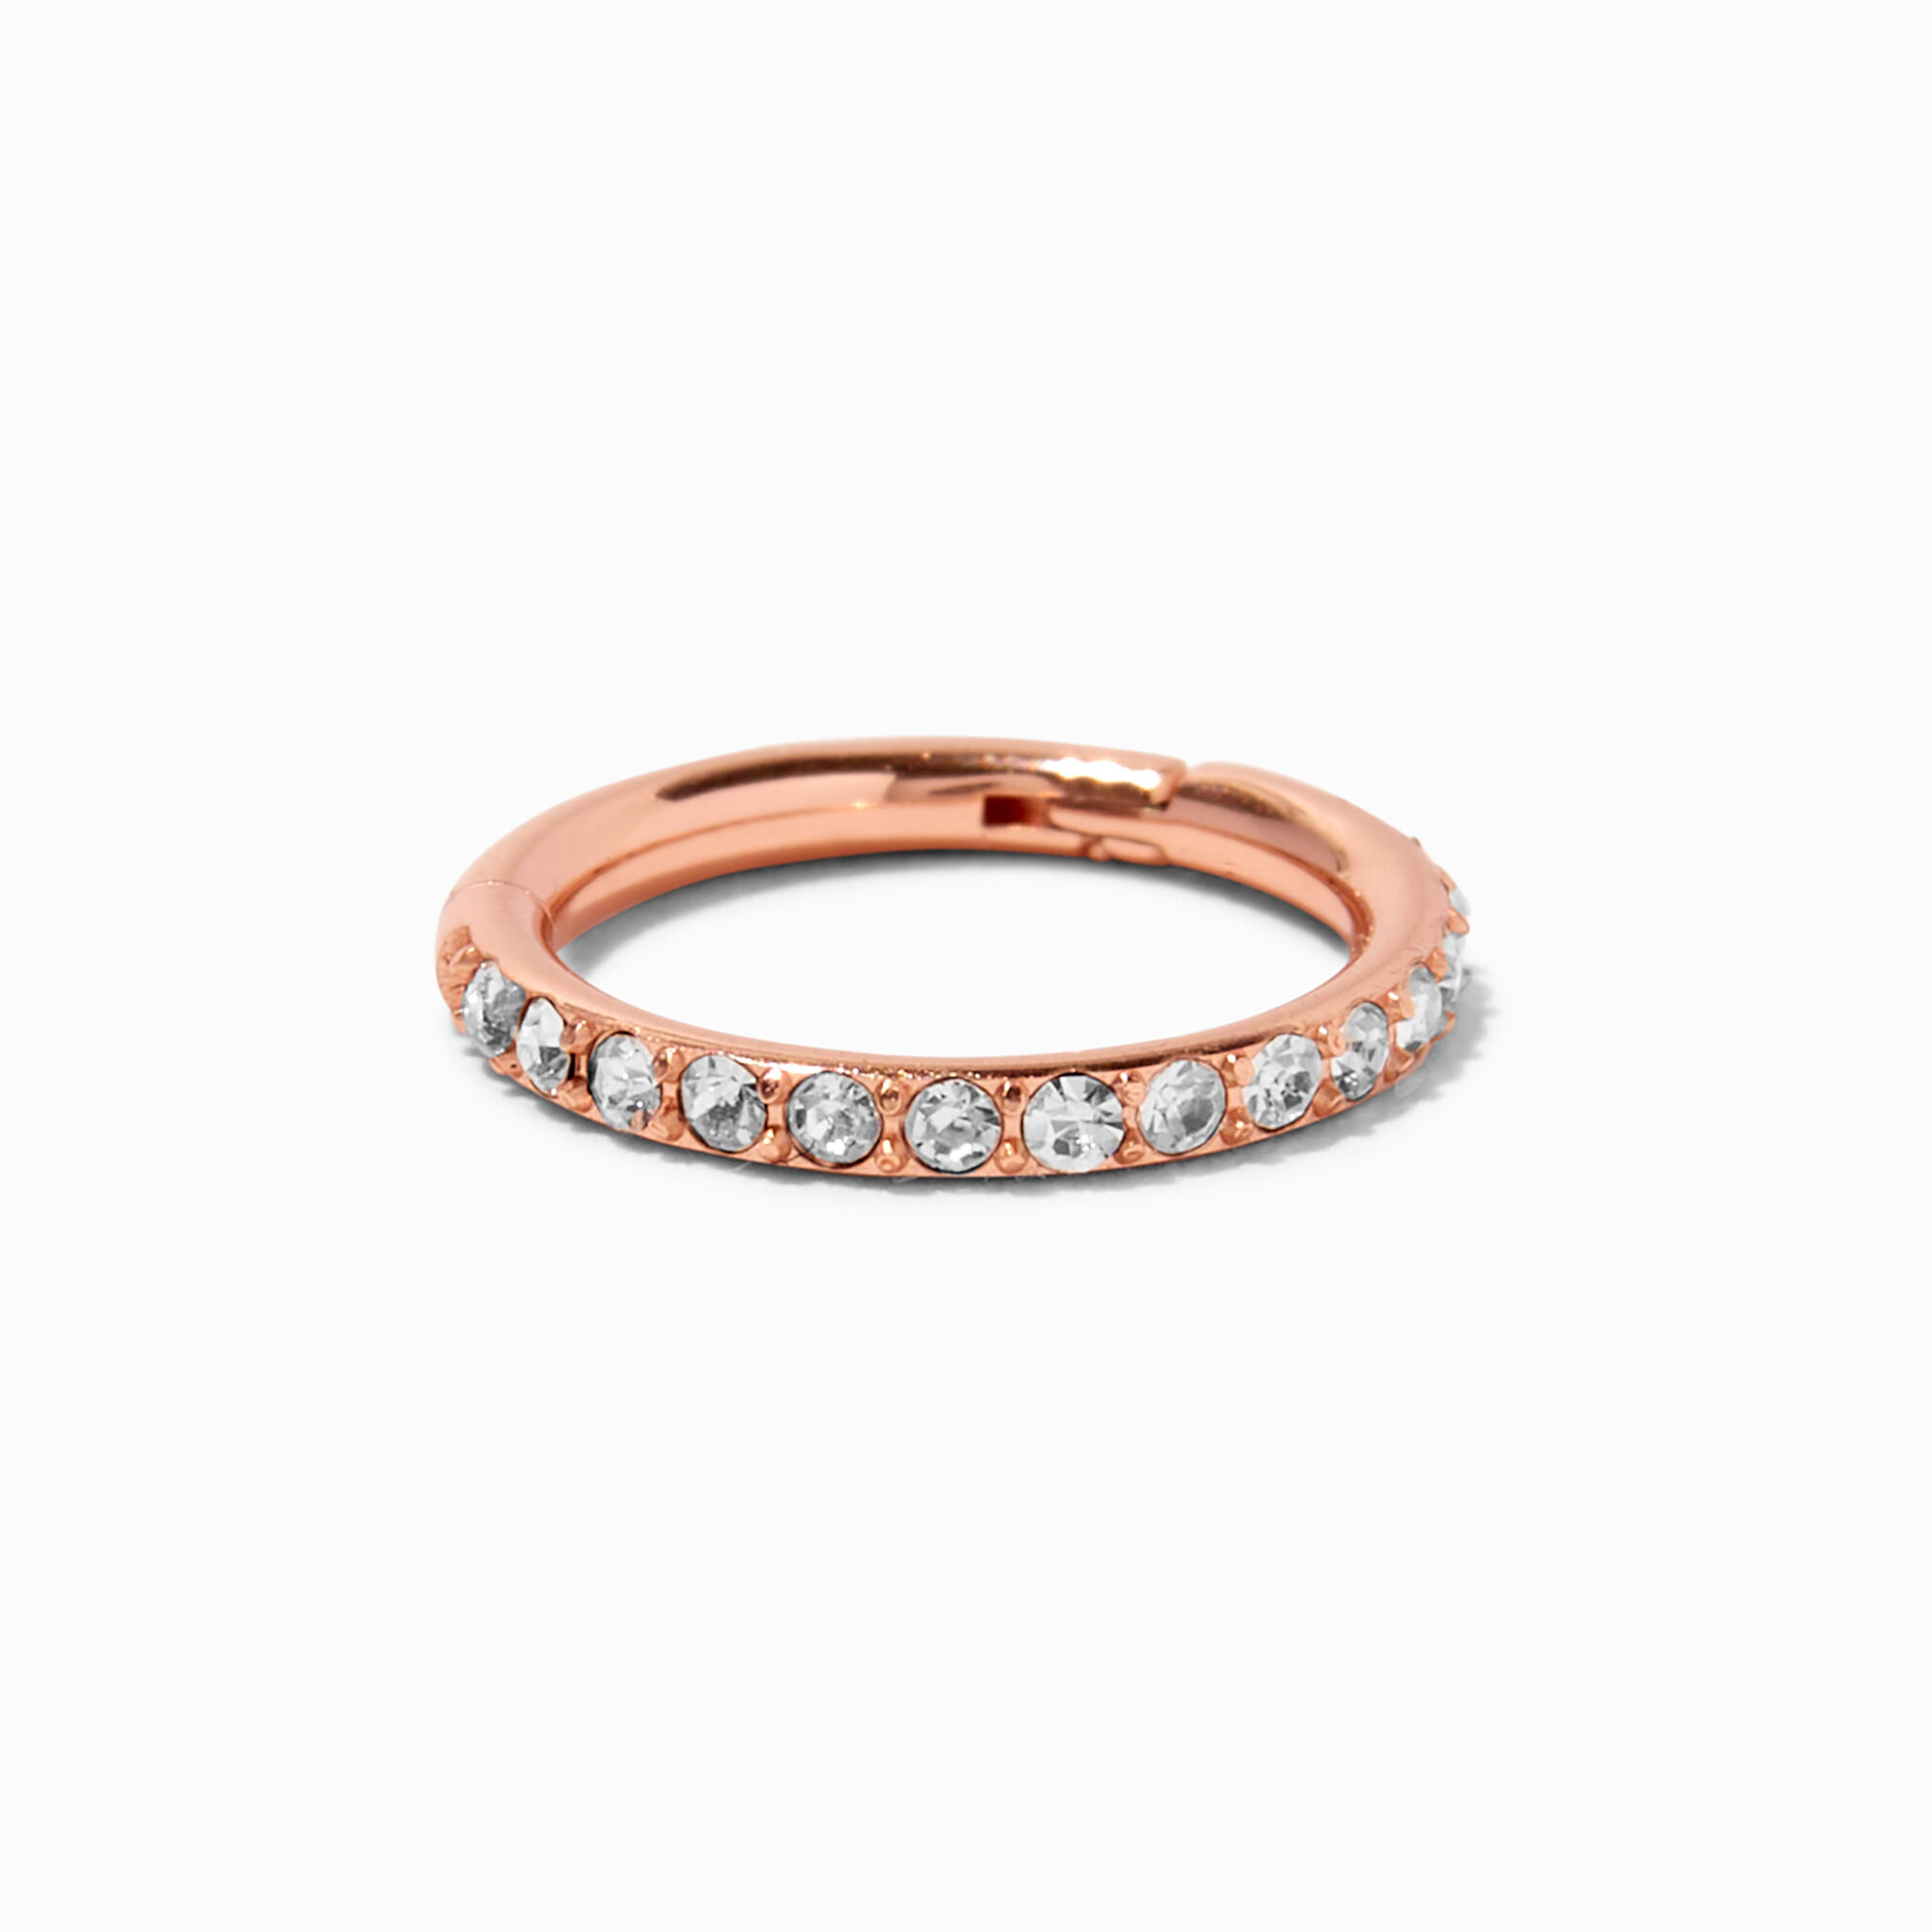 View Claires Tone 16G Embellished Titanium Nose Hoop Rose Gold information